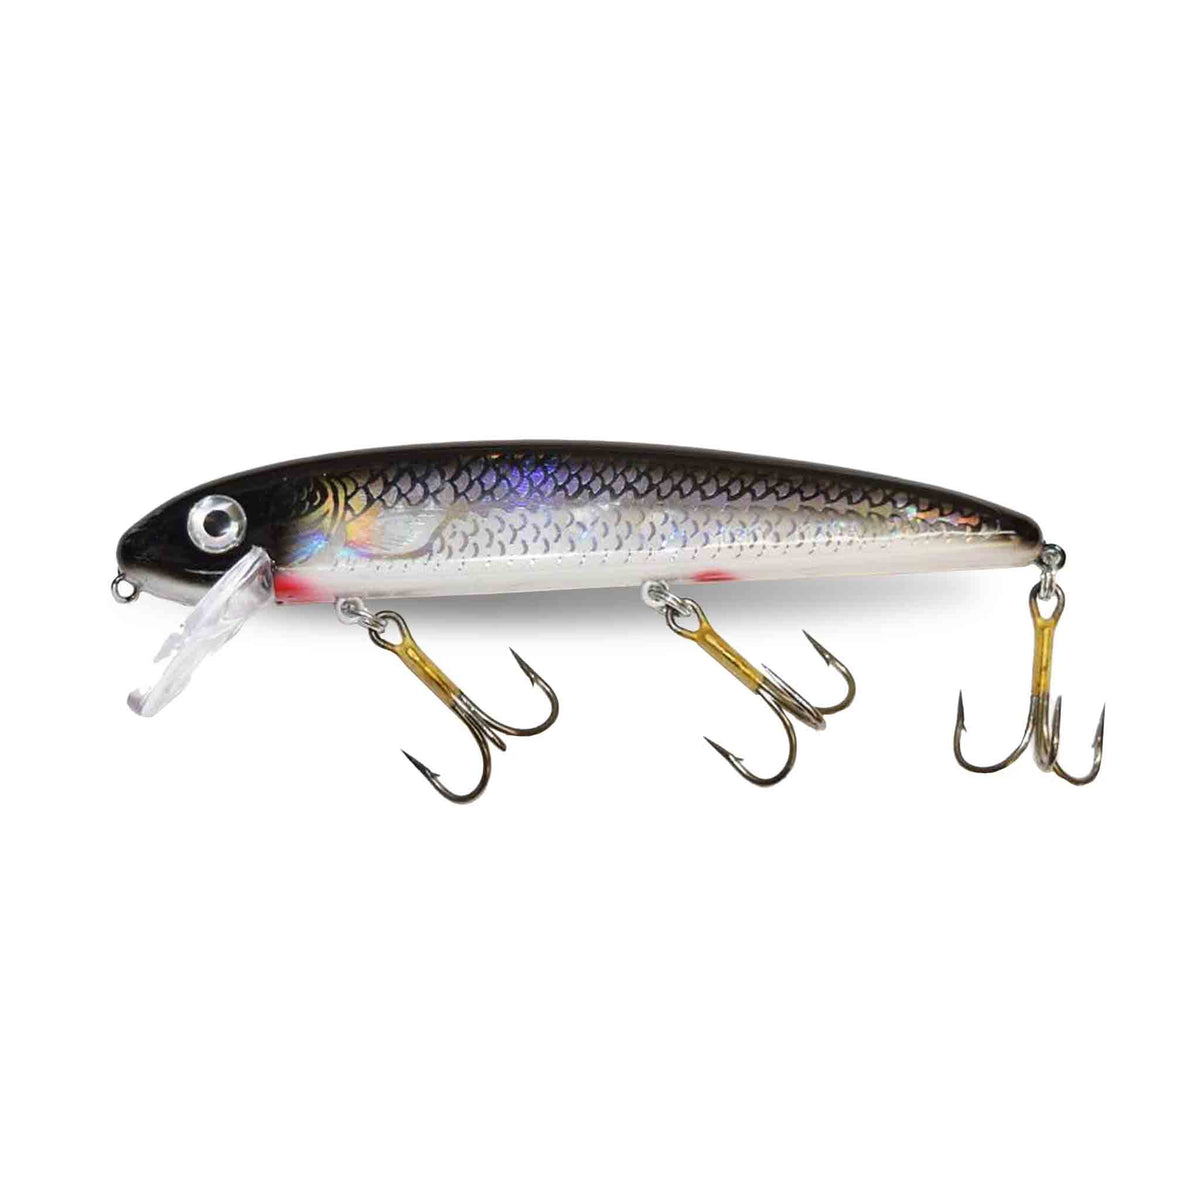 View of Crankbaits Musky Mania Tackle Jake 8'' Crankbait Silver Shiner Holoform available at EZOKO Pike and Musky Shop